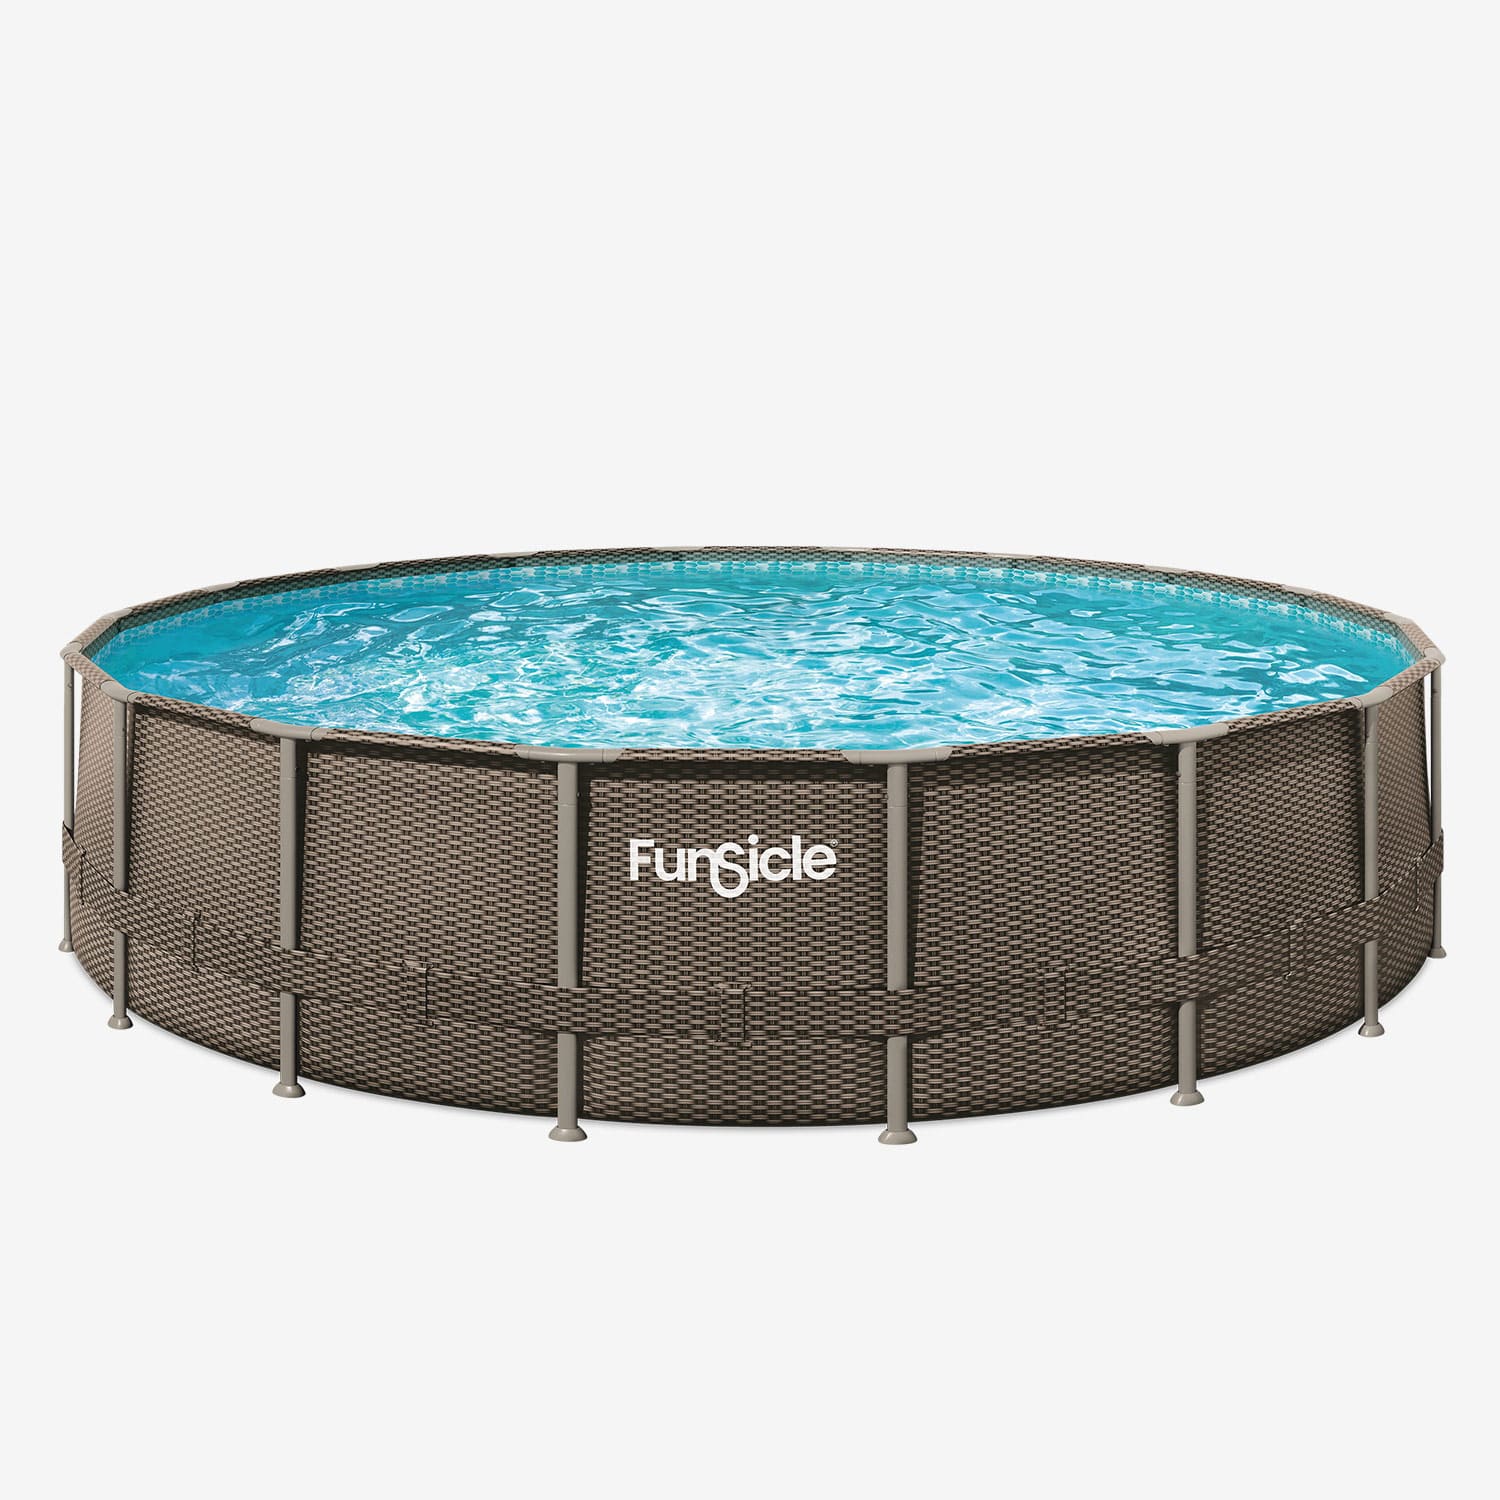 Funsicle 18 ft Oasis Designer Pool - Dark Double Rattan without people